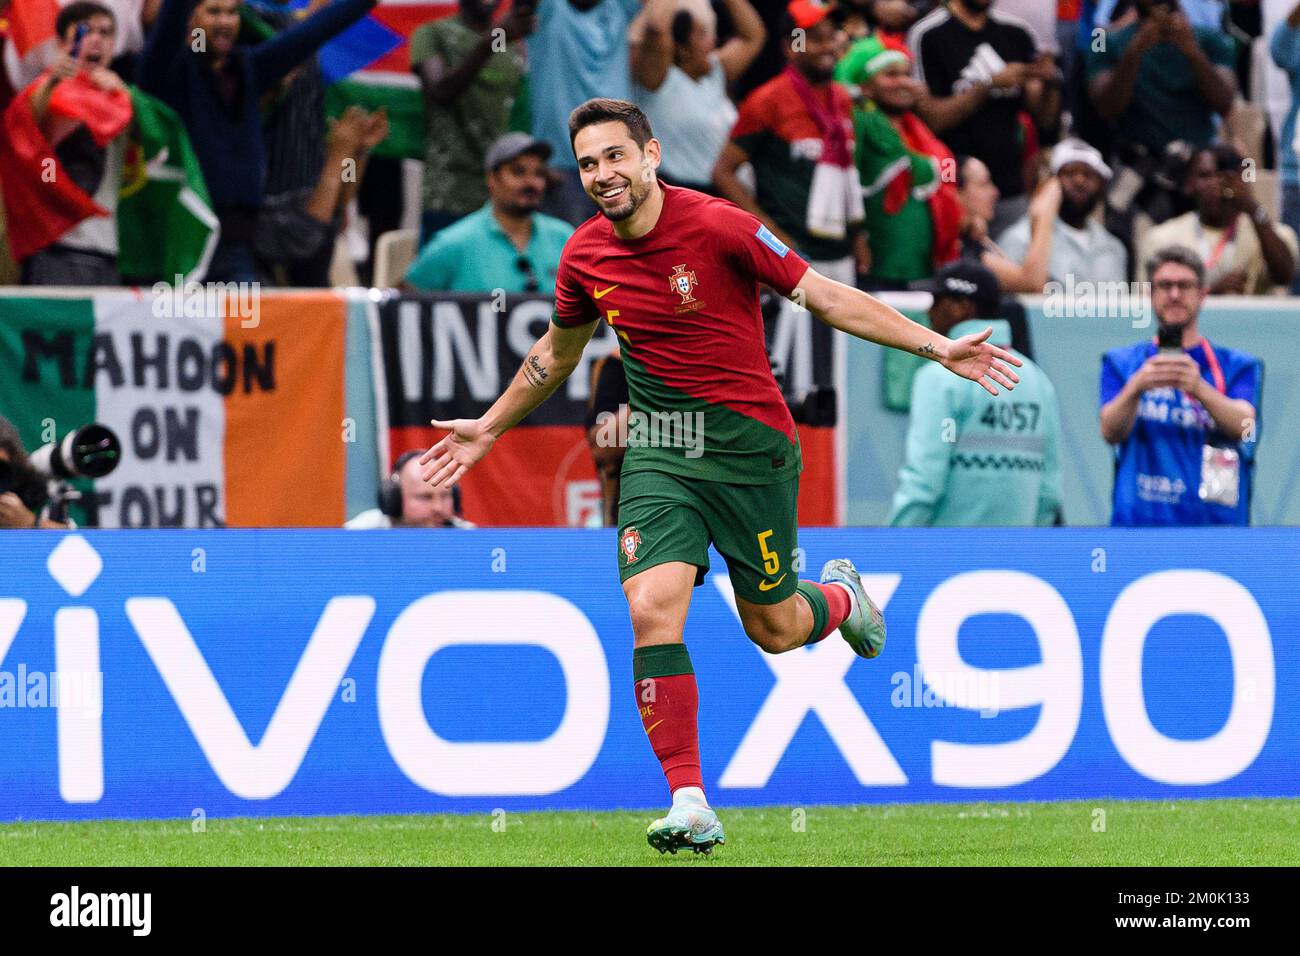 Lusail, Qatar. 06th Dec, 2022. Estadio Lusail Raphael Guerreiro of Portugal celebrates after scoring a goal (4-0) during the match between Portugal and Switzerland, valid for the round of 16 of the World Cup, held at the Estadio Nacional de Lusail in Lusail, Qatar. (Marcio Machado/SPP) Credit: SPP Sport Press Photo. /Alamy Live News Stock Photo